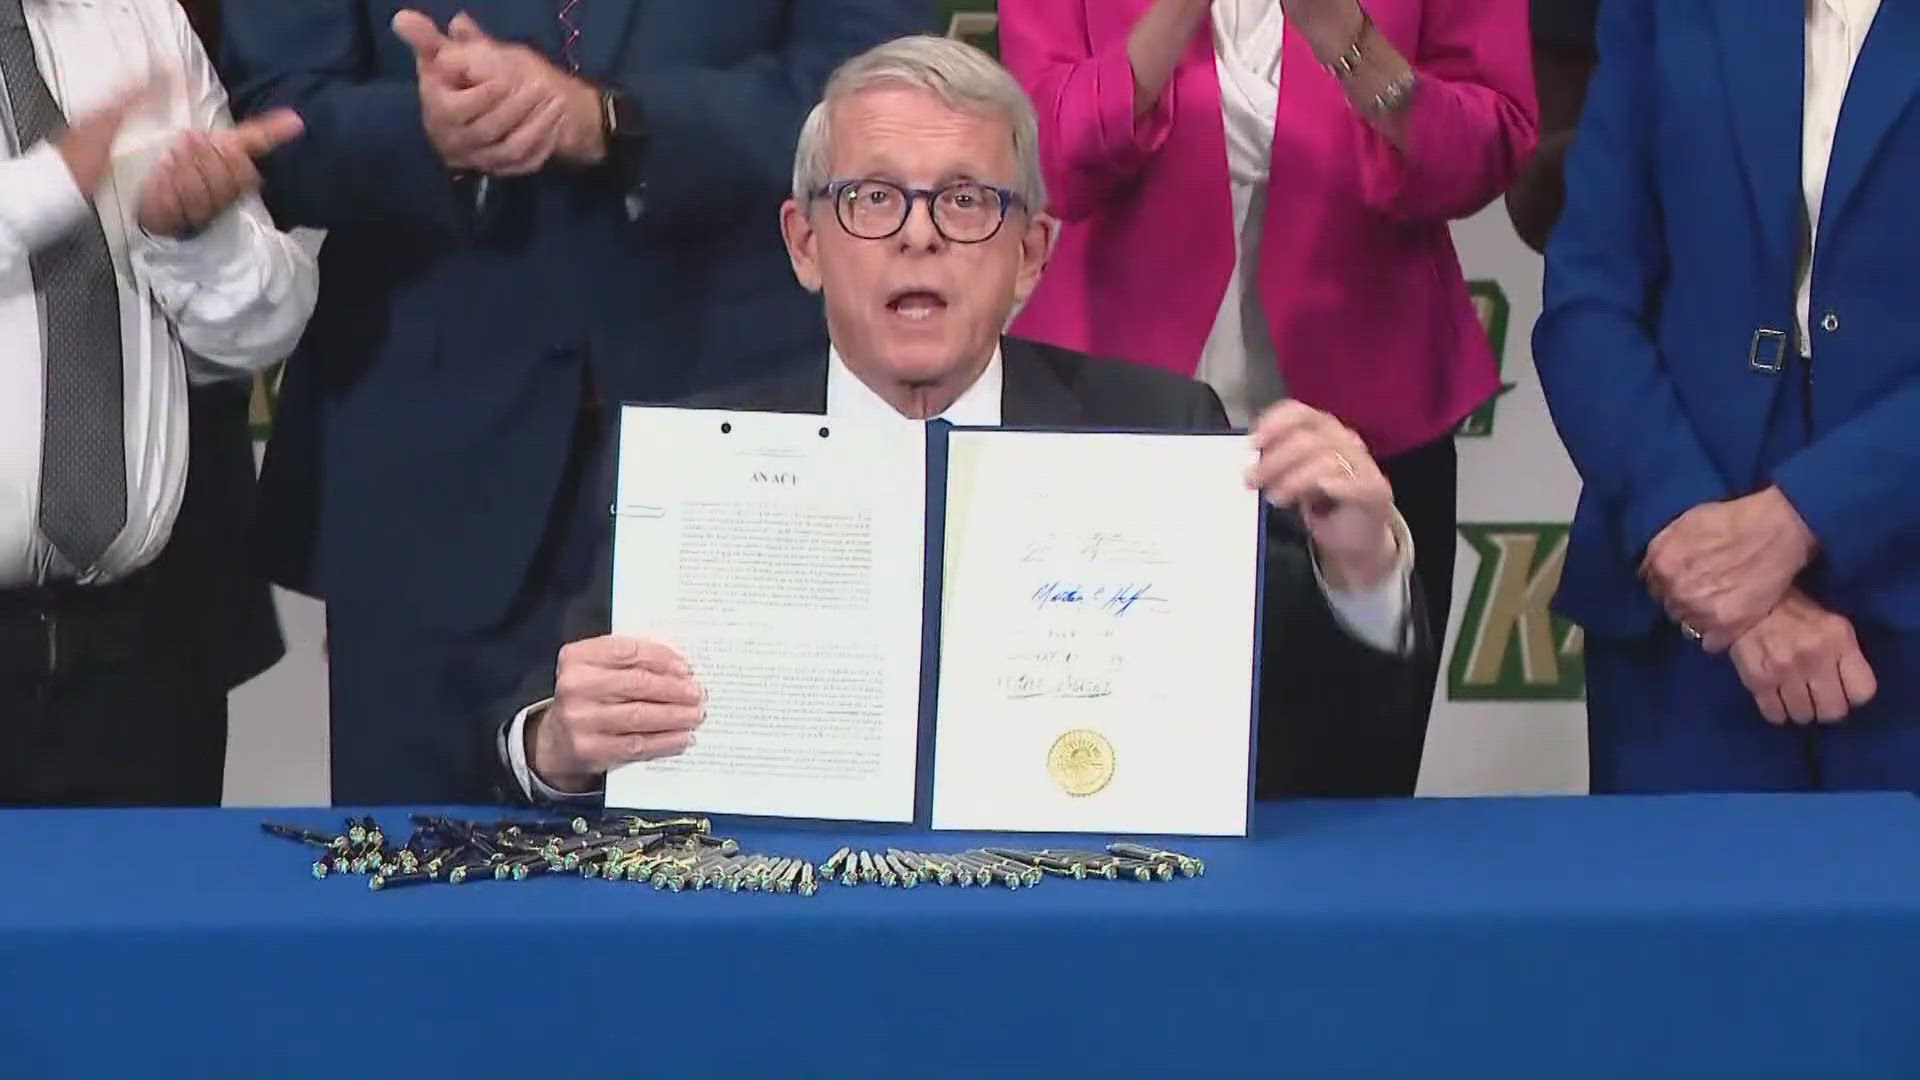 Amid a statewide effort to crack down on the use of cell phones in schools, Ohio Gov. Mike DeWine signed House 250 bill into law. 3News' Danielle Wiggins reports.